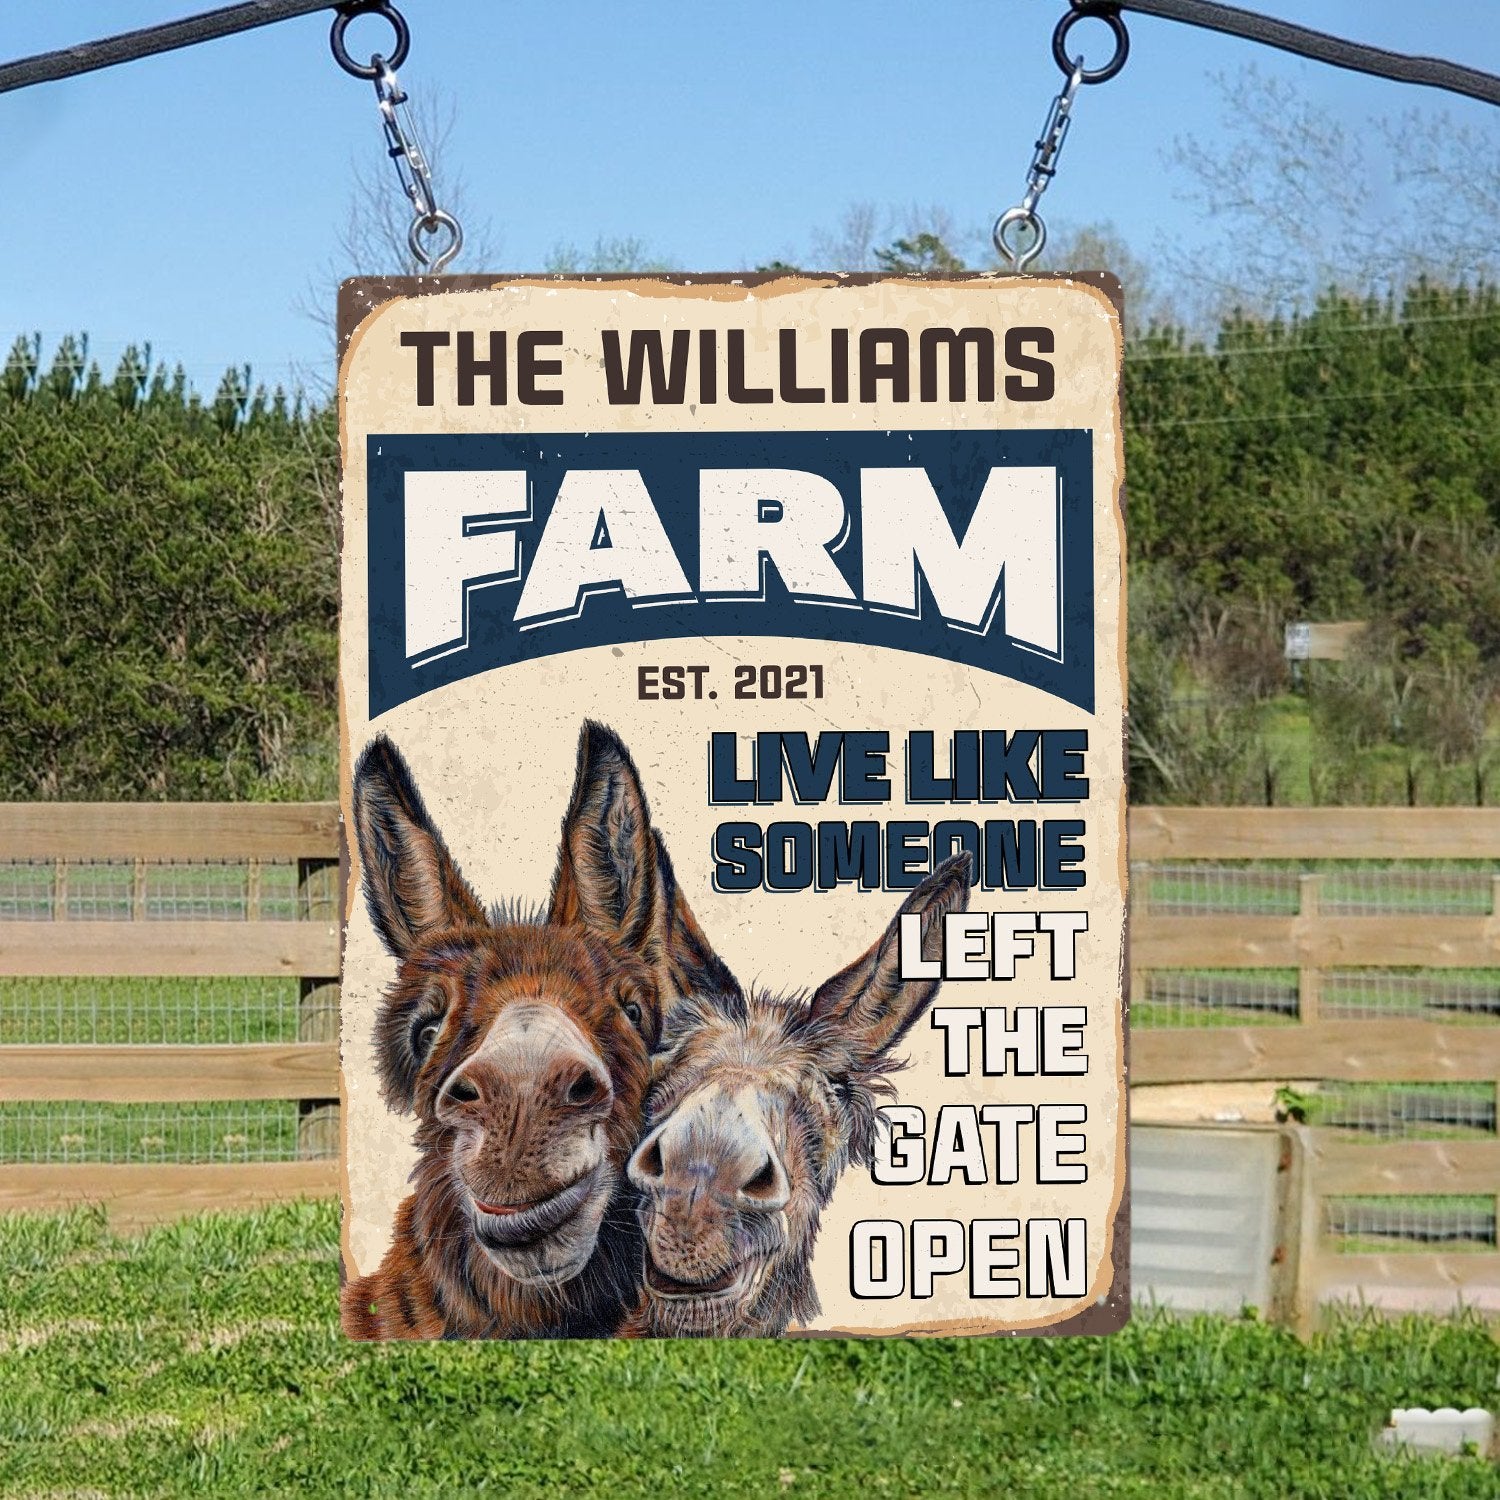 Live Life Someone Left The Gate Open, Customized Farm Sign